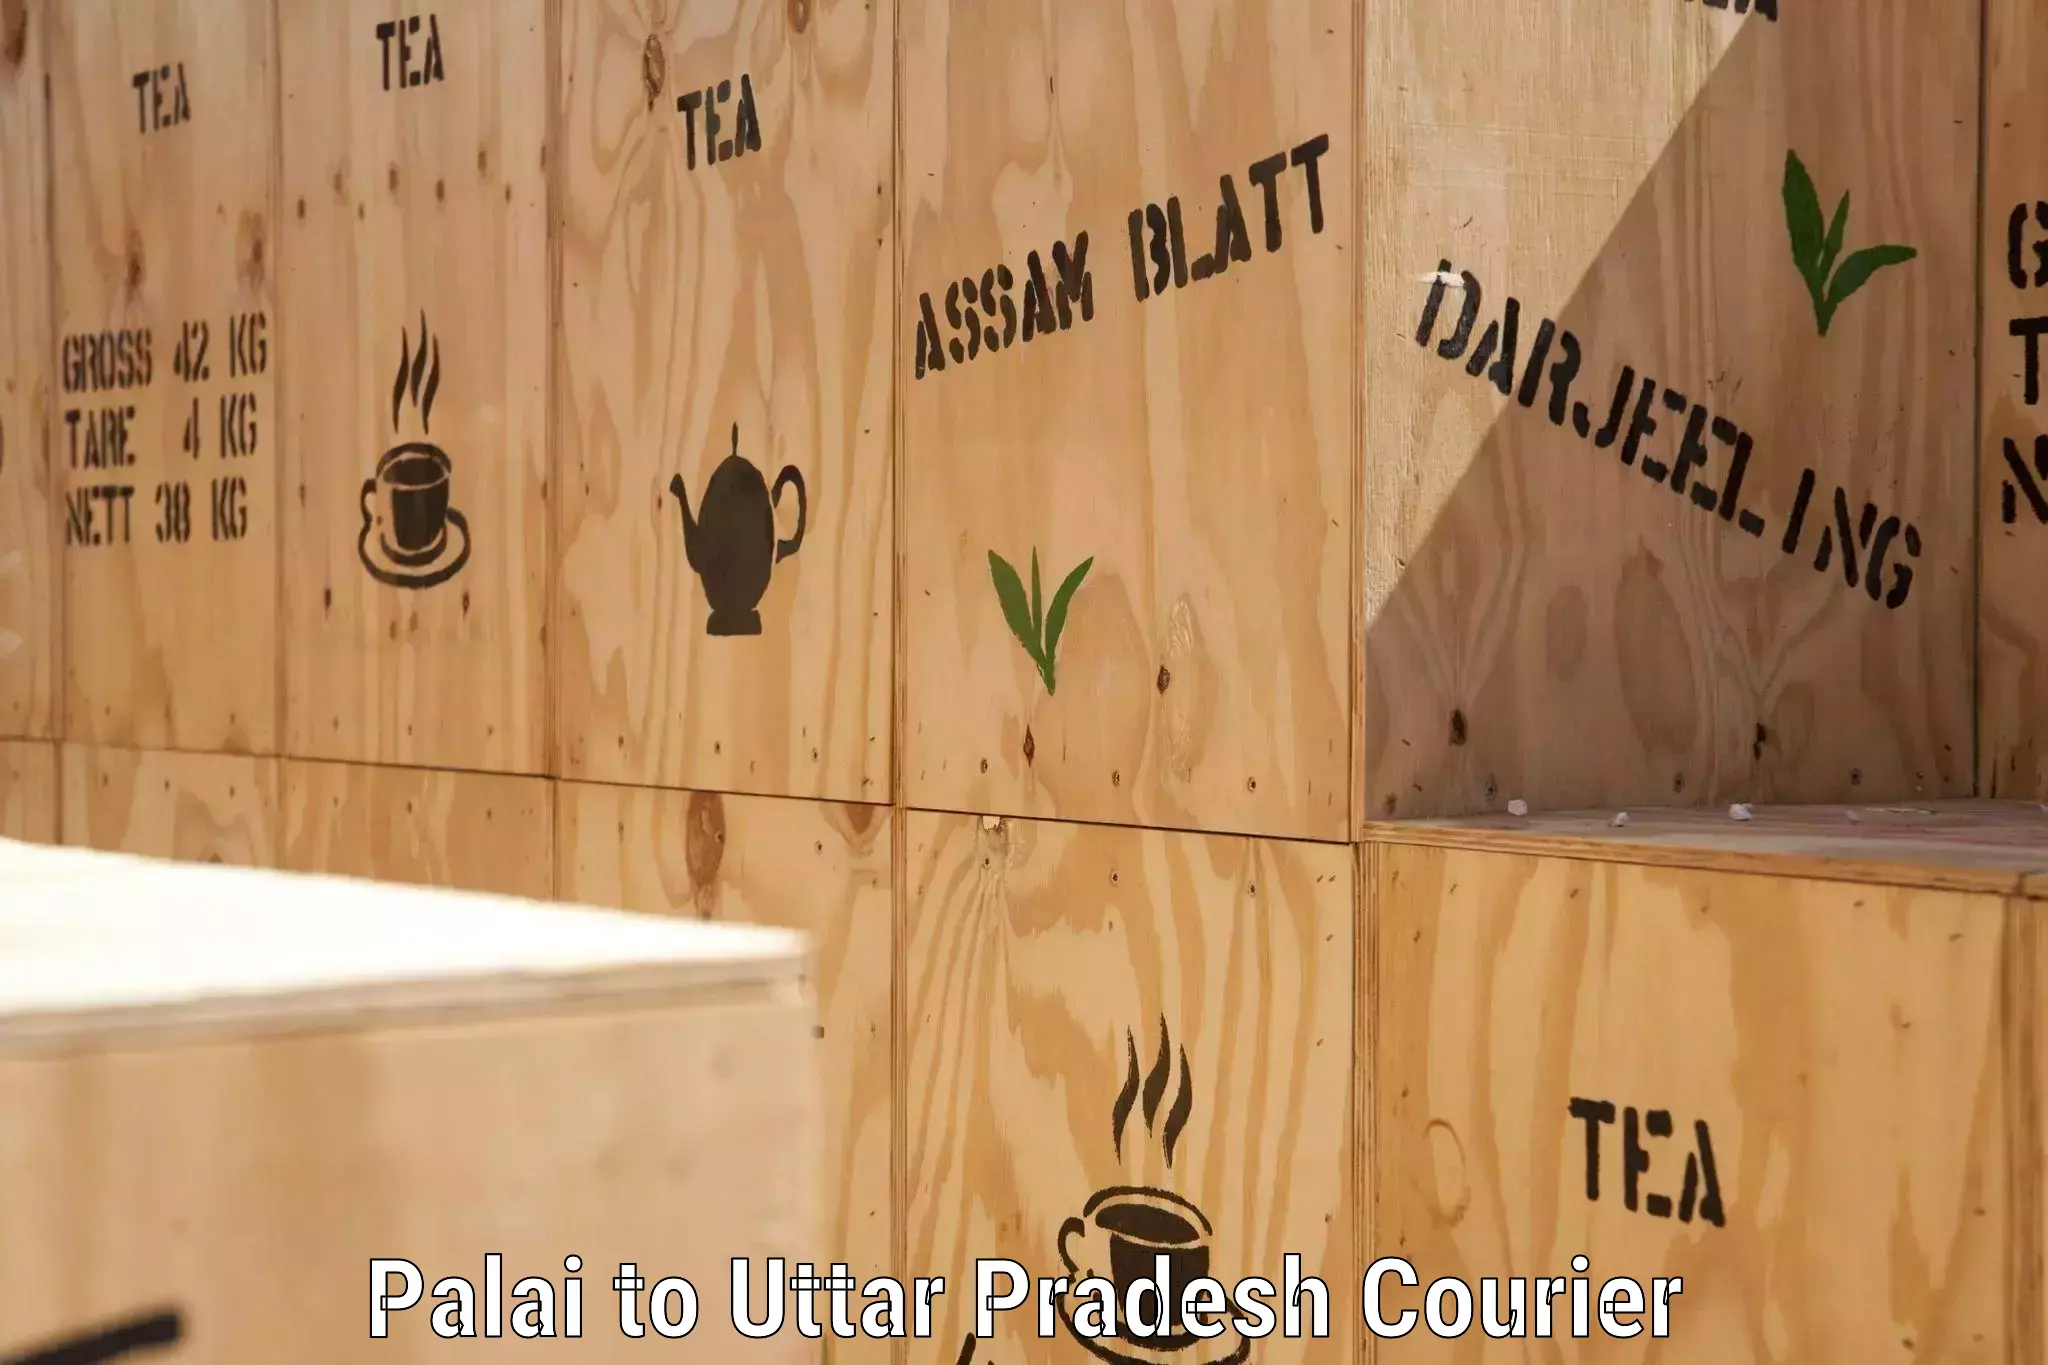 24-hour courier service Palai to Rath